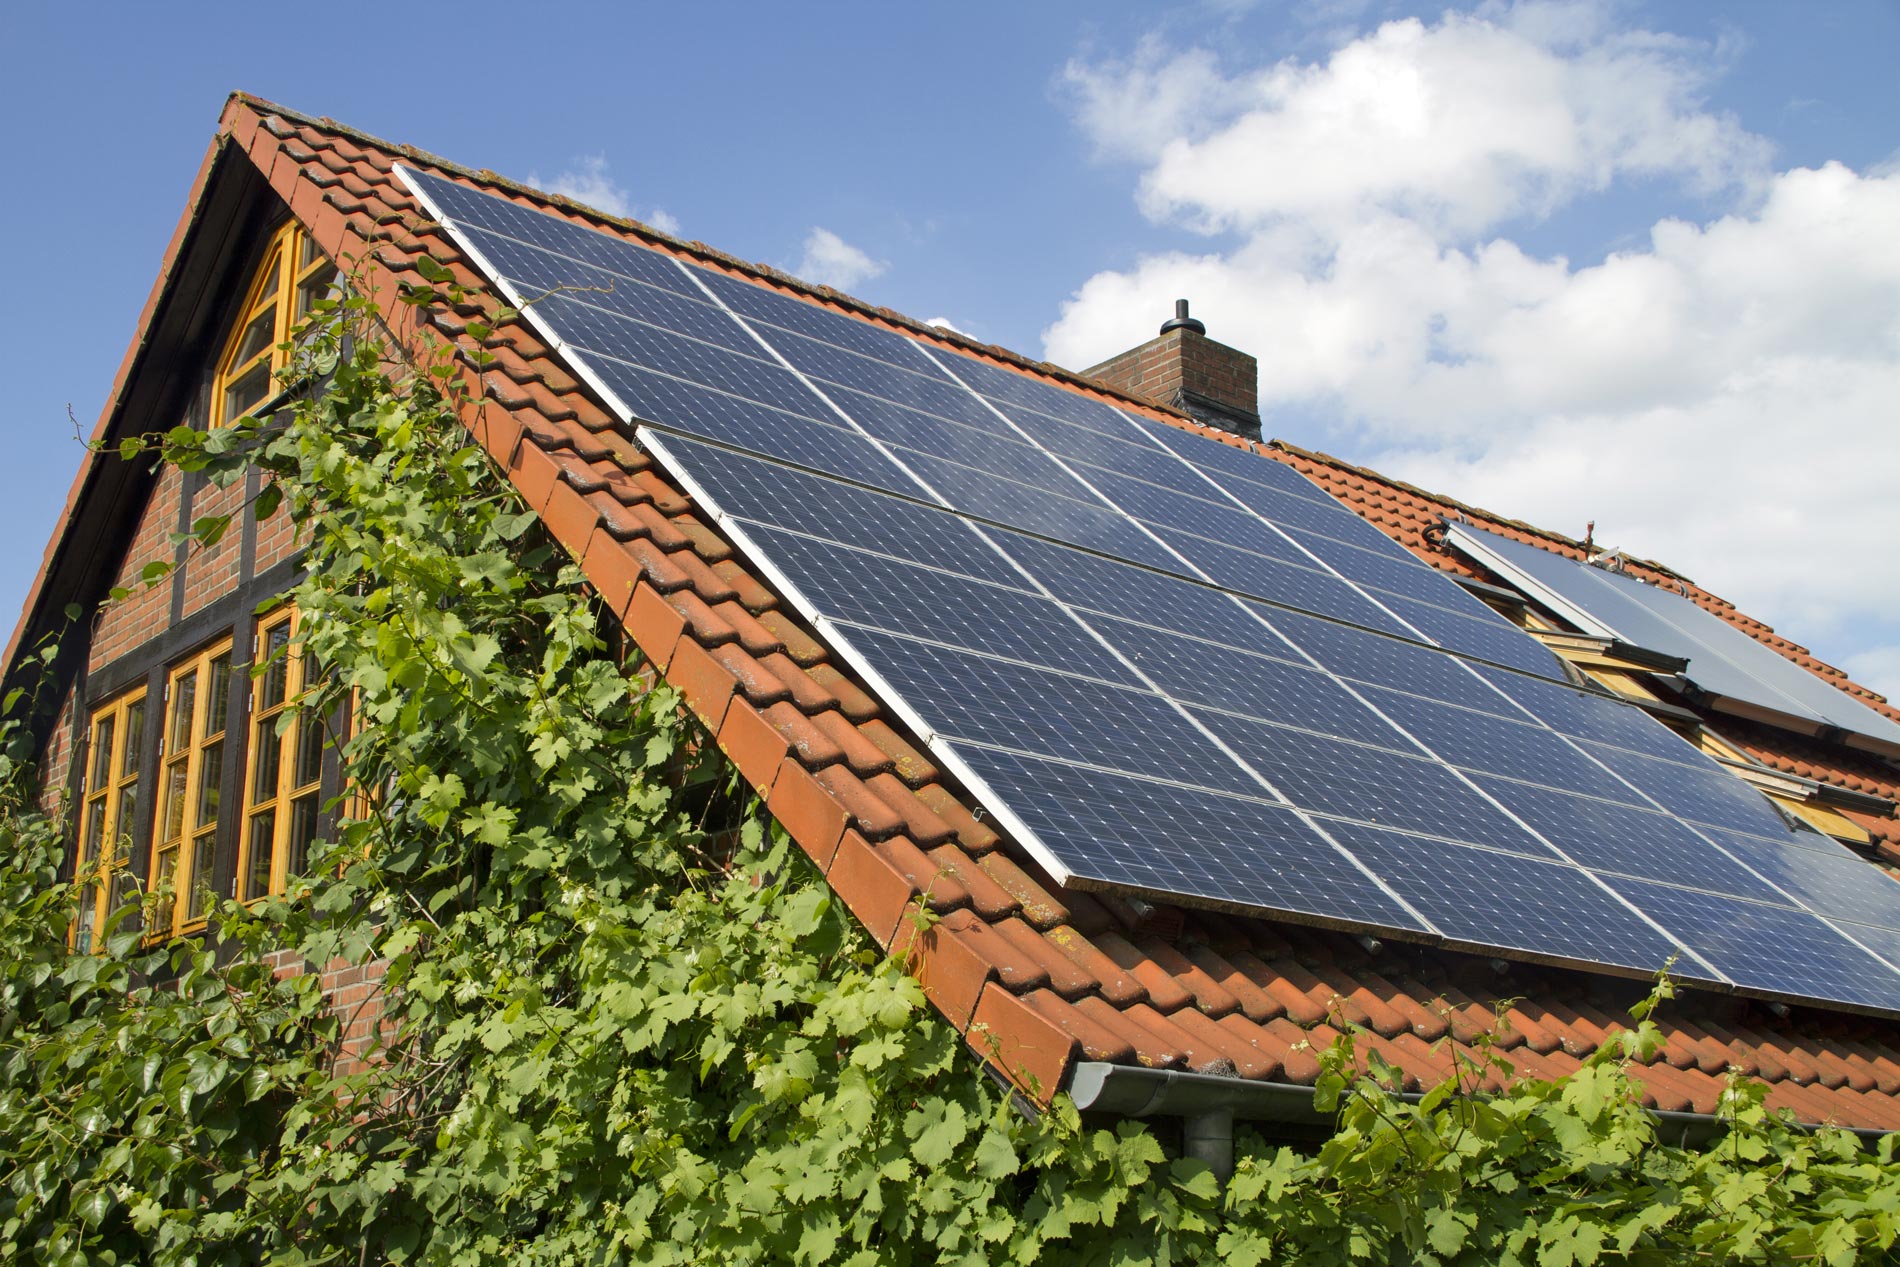 Your guide to buying solar panels wisely